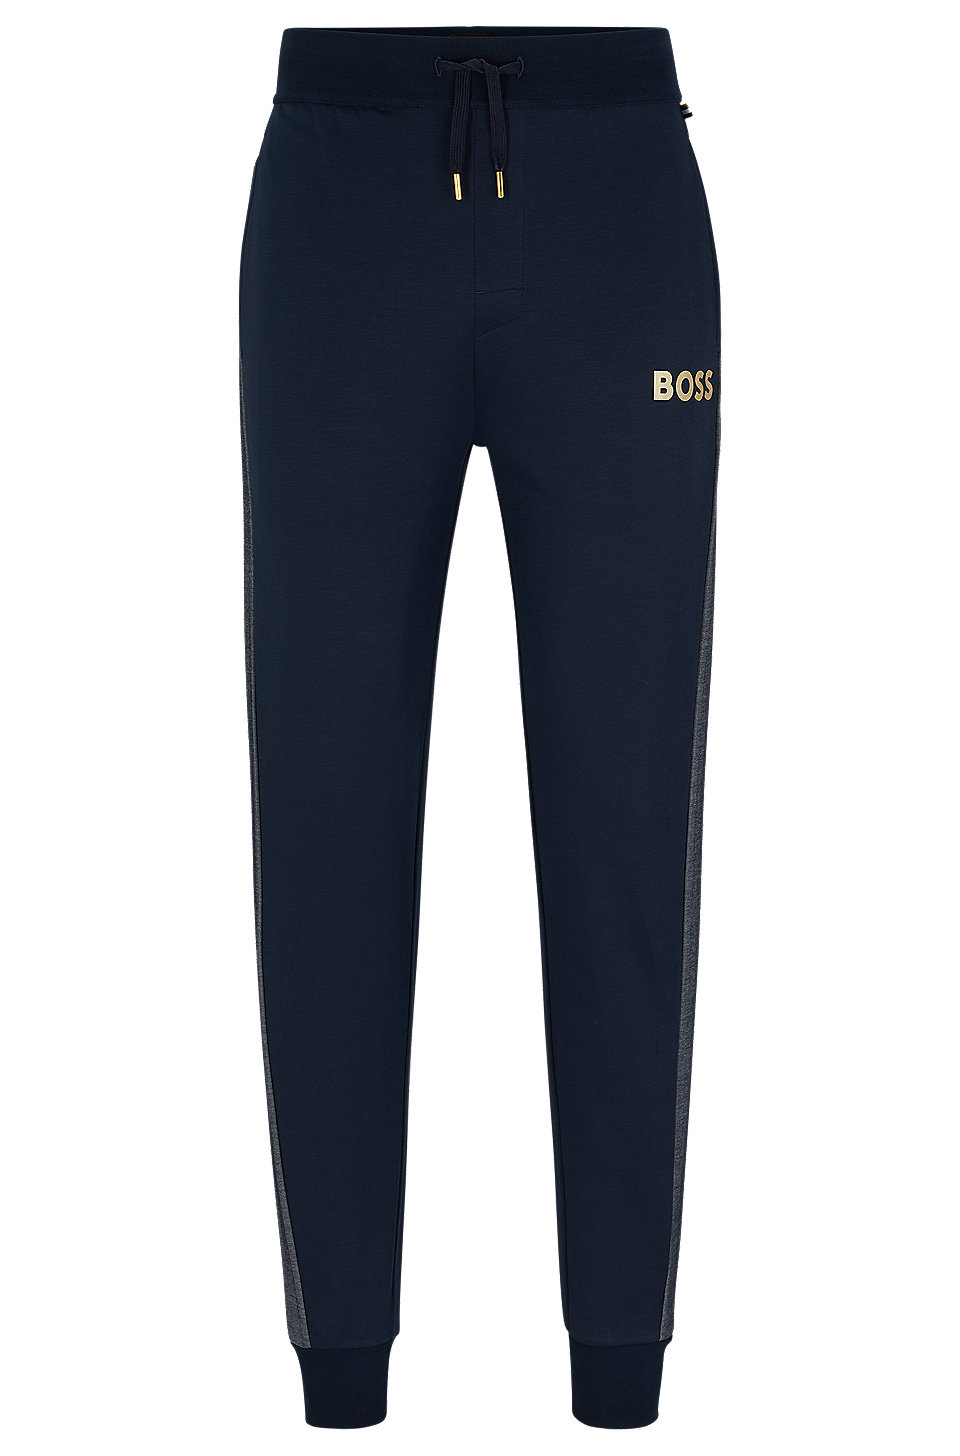 BOSS - Sweatpants with embroidered logo